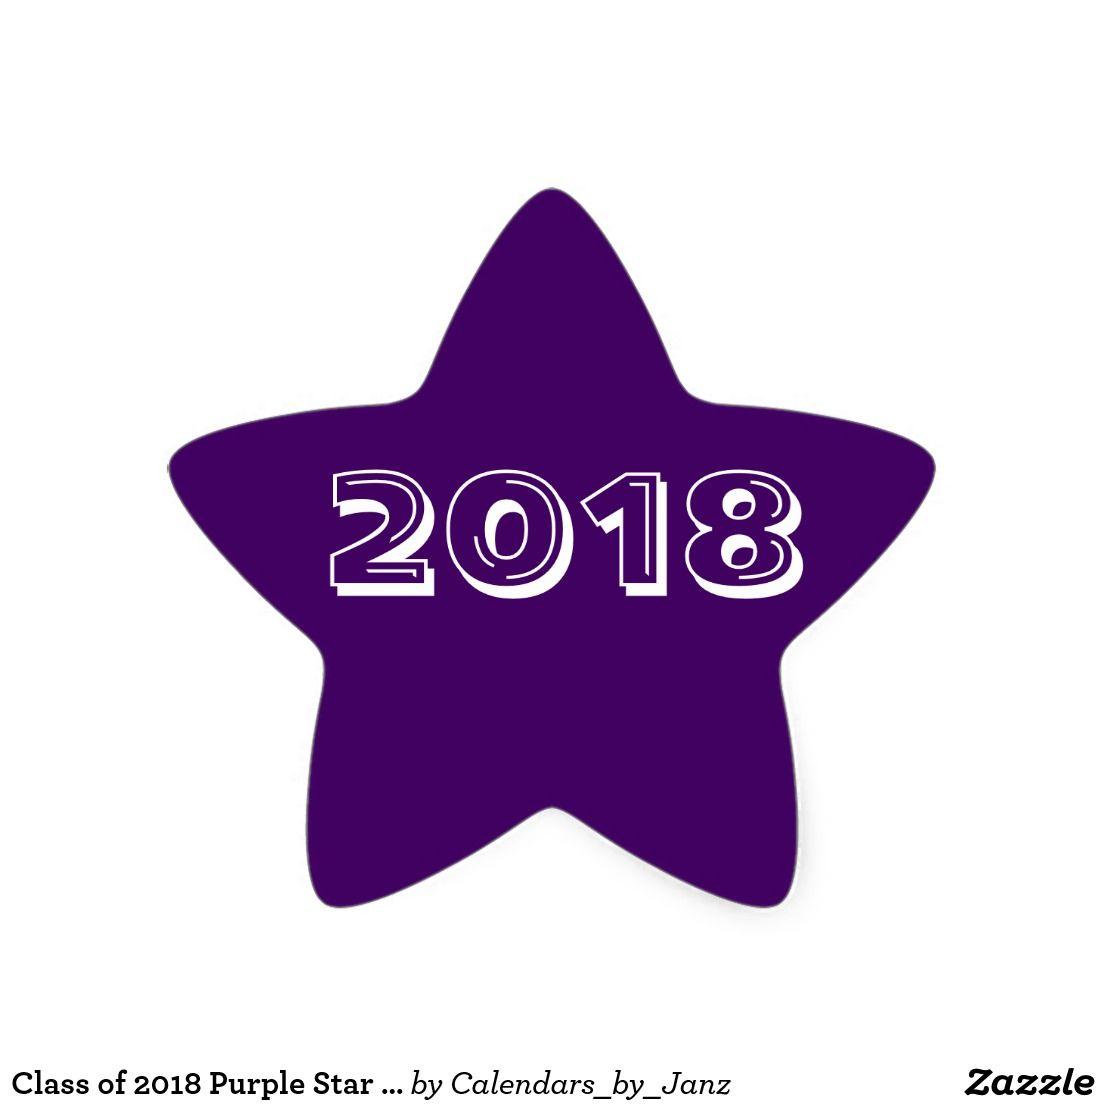 Purple and Gold Star Logo - Class of 2018 Purple Star Sticker by Janz. Color Purple